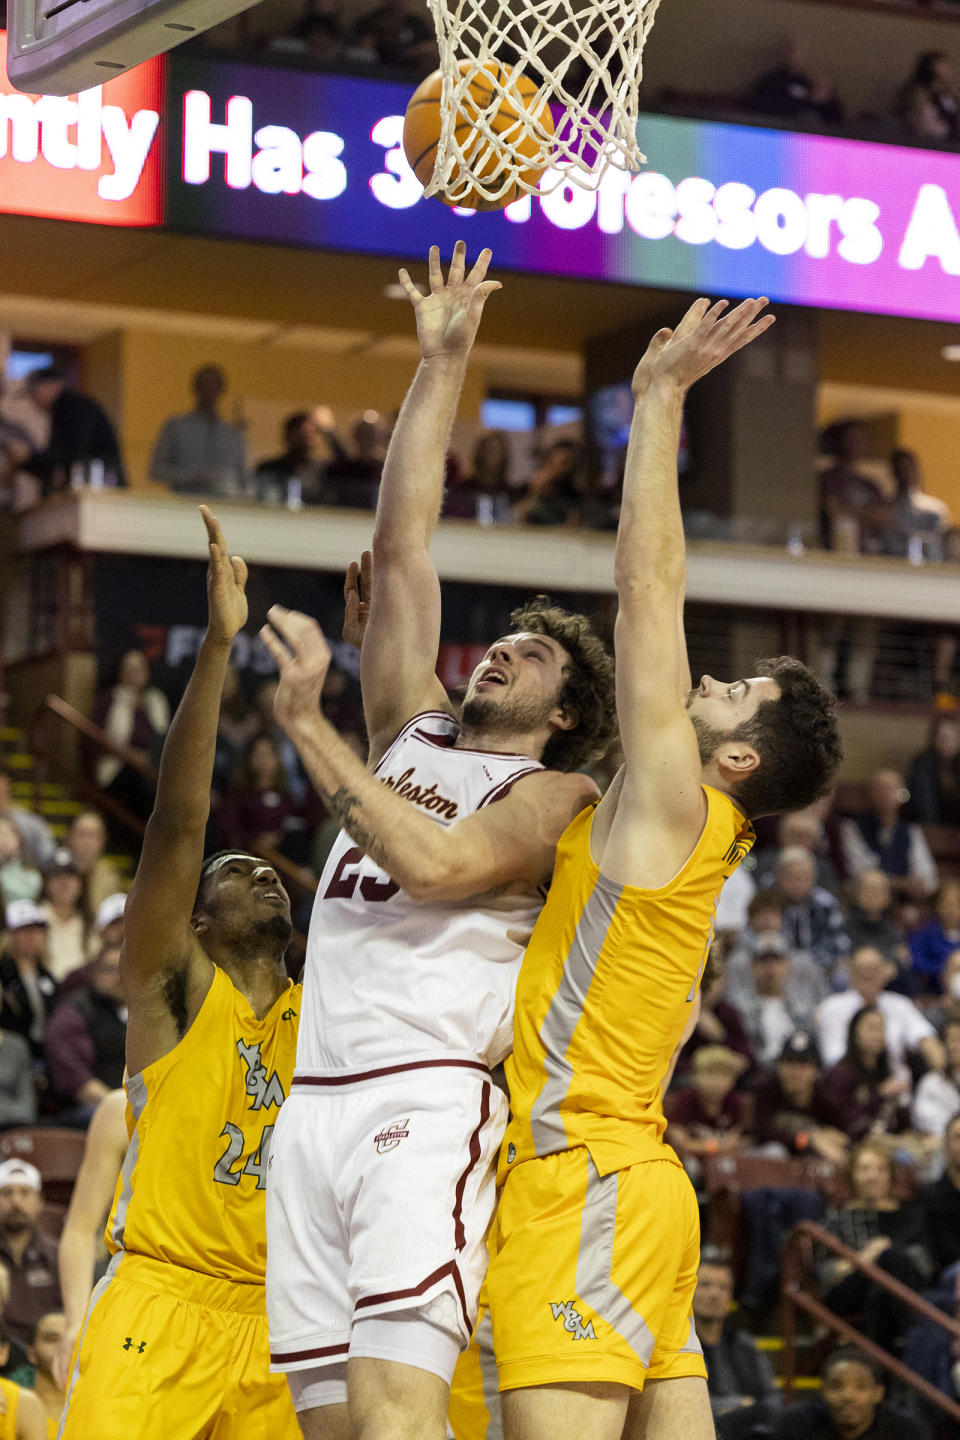 Charleston's Ben Burnham (25) shoots between two defenders from William & Mary in the first half of an NCAA college basketball game in Charleston, S.C., Monday, Jan. 16, 2023. (AP Photo/Mic Smith)